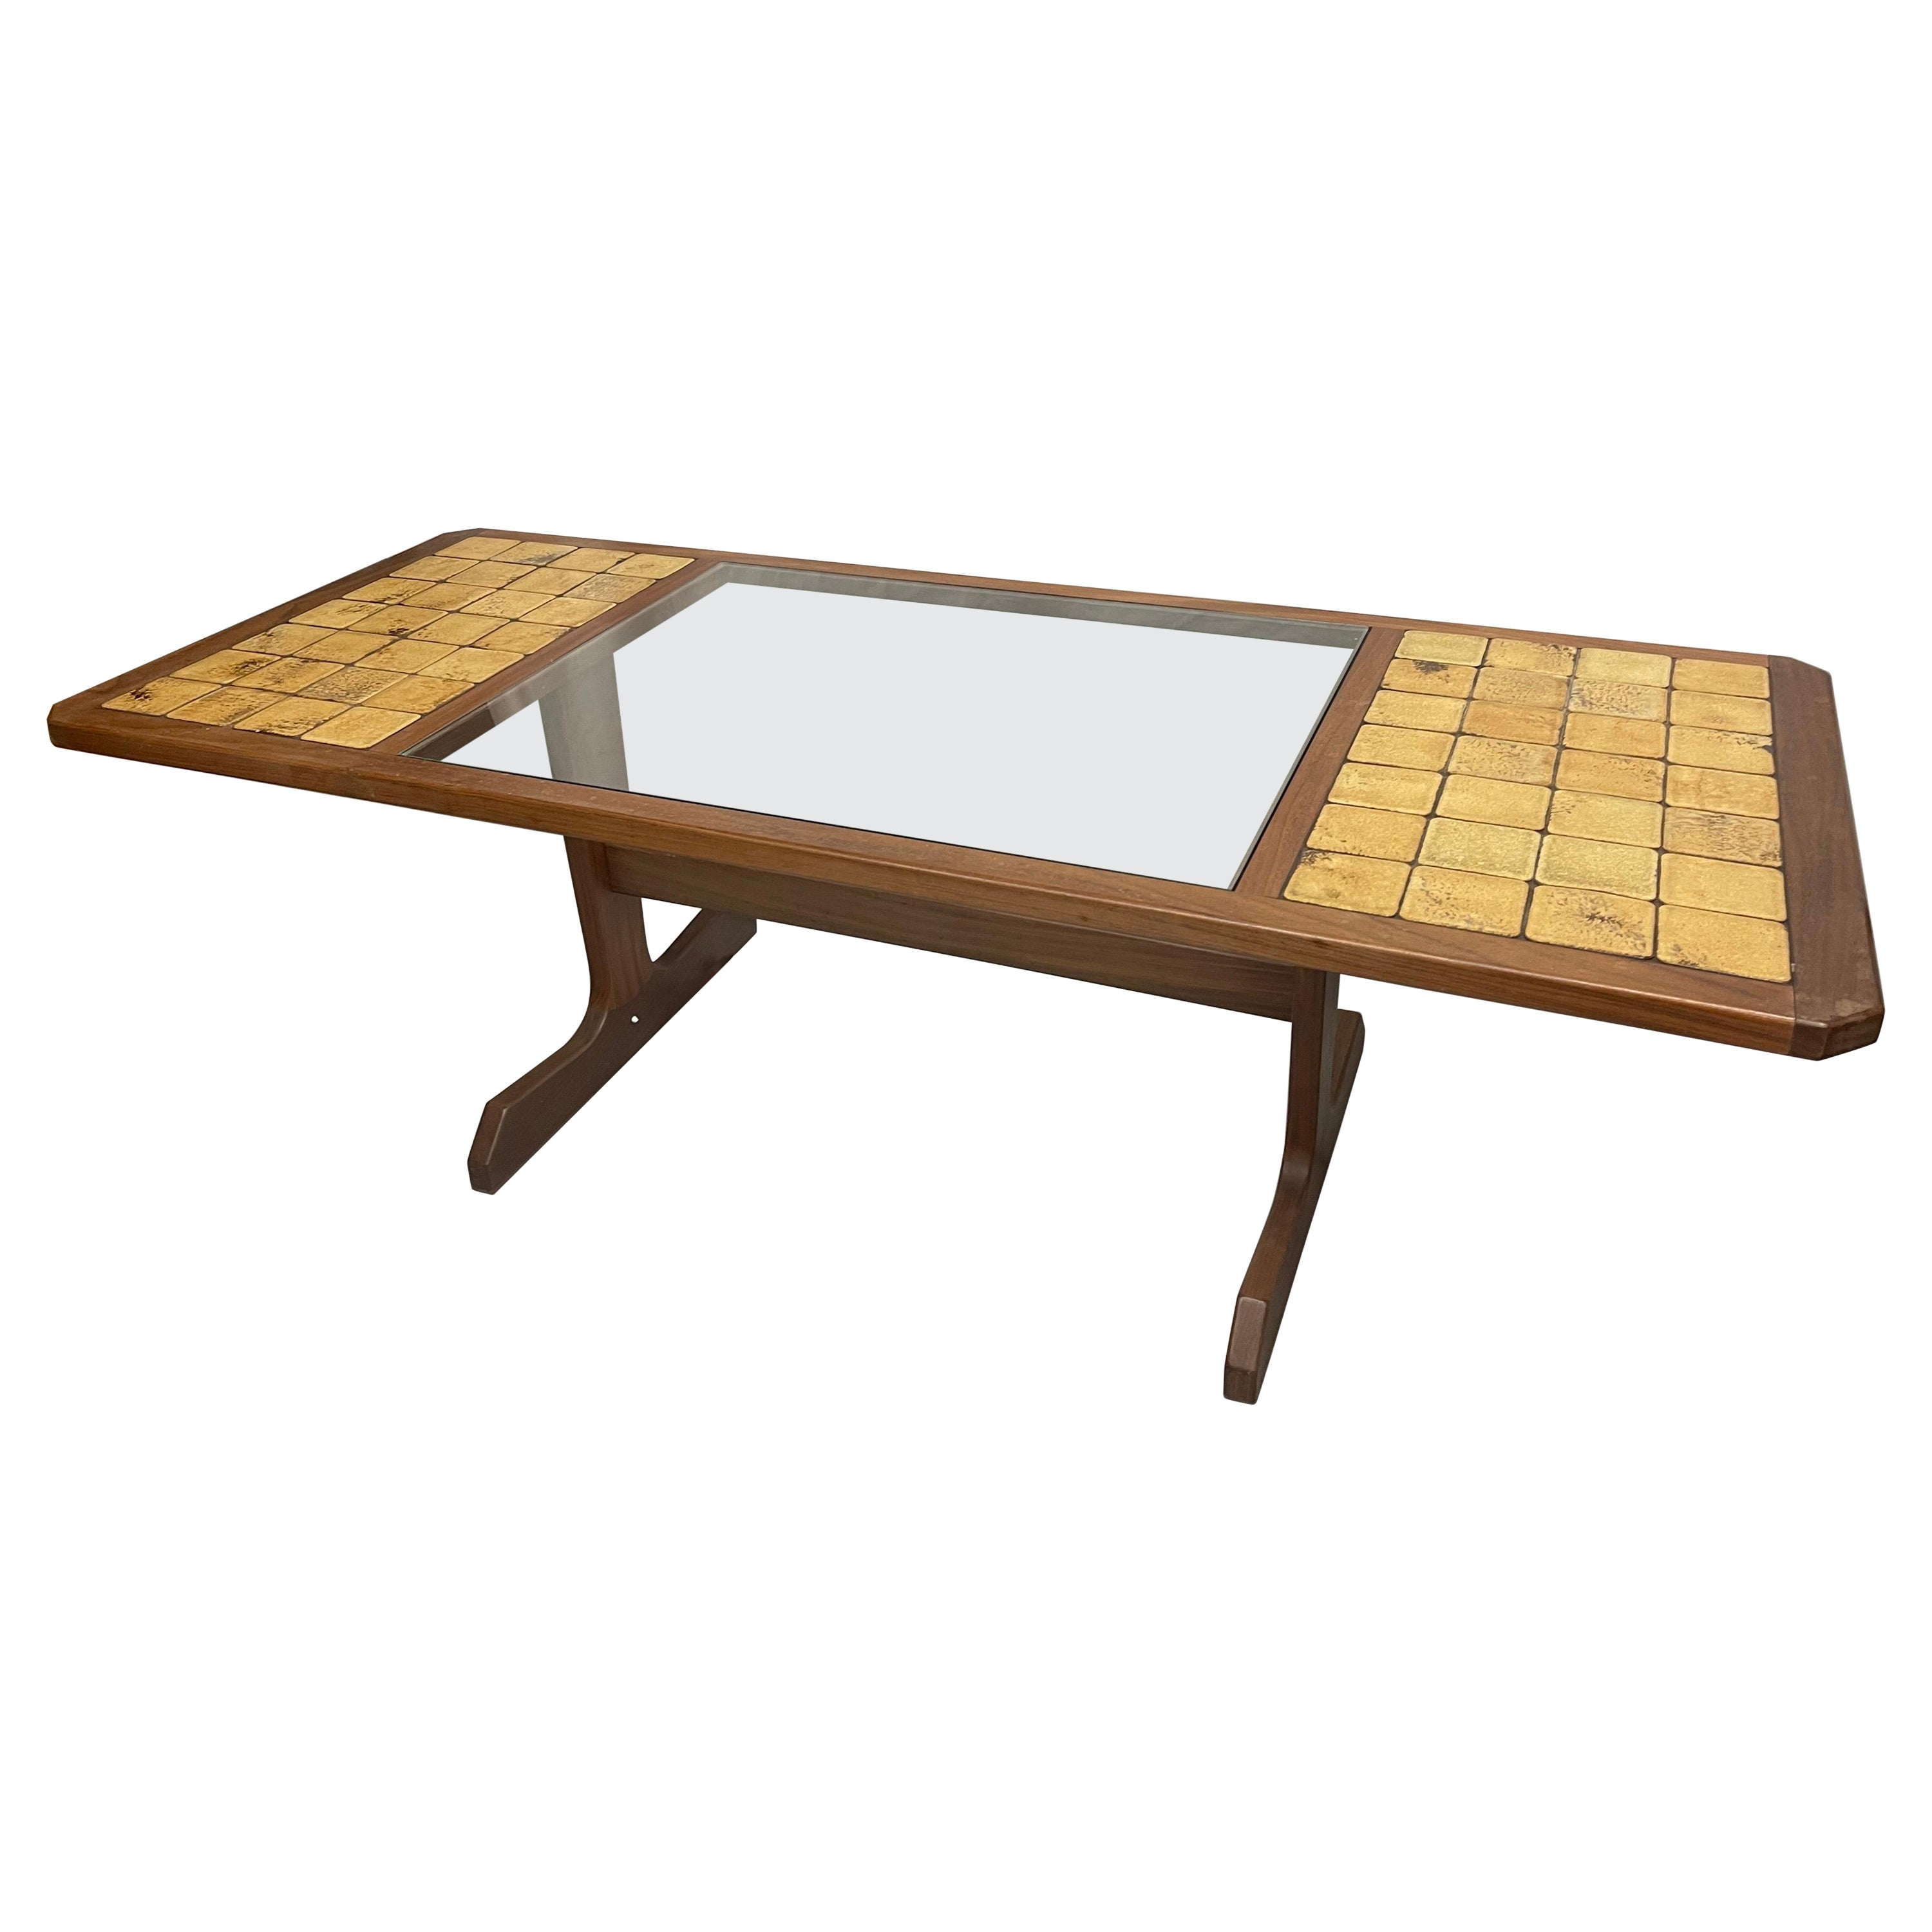 1970s G Plan Teak Mid-Century Modern Teak Coffee Table with Tiles and Glass